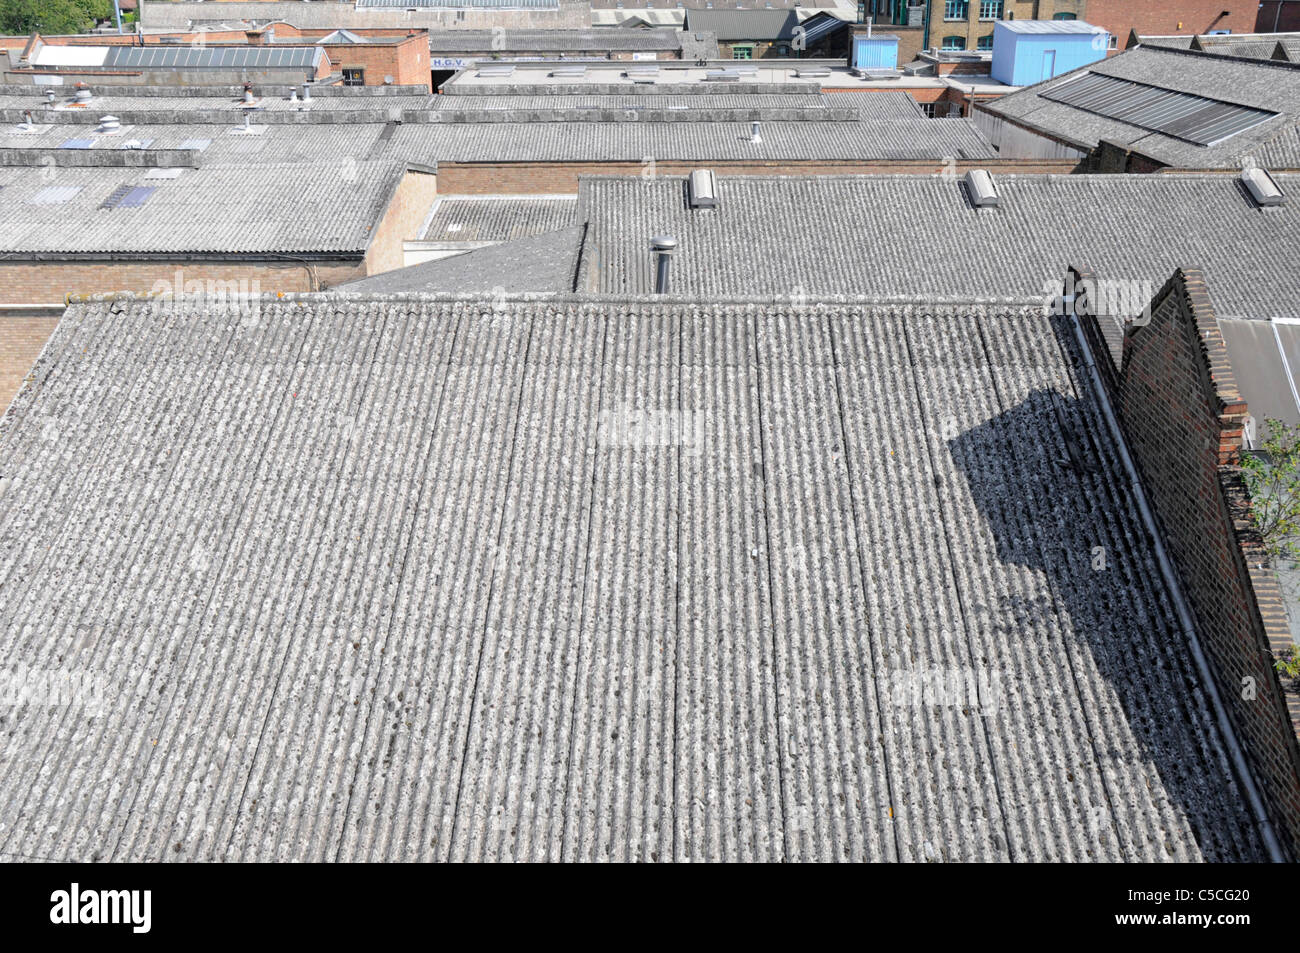 Looking down from above on urban landscape sloping grey corrugated asbestos cement roofing on industrial business units Hackney East London England UK Stock Photo